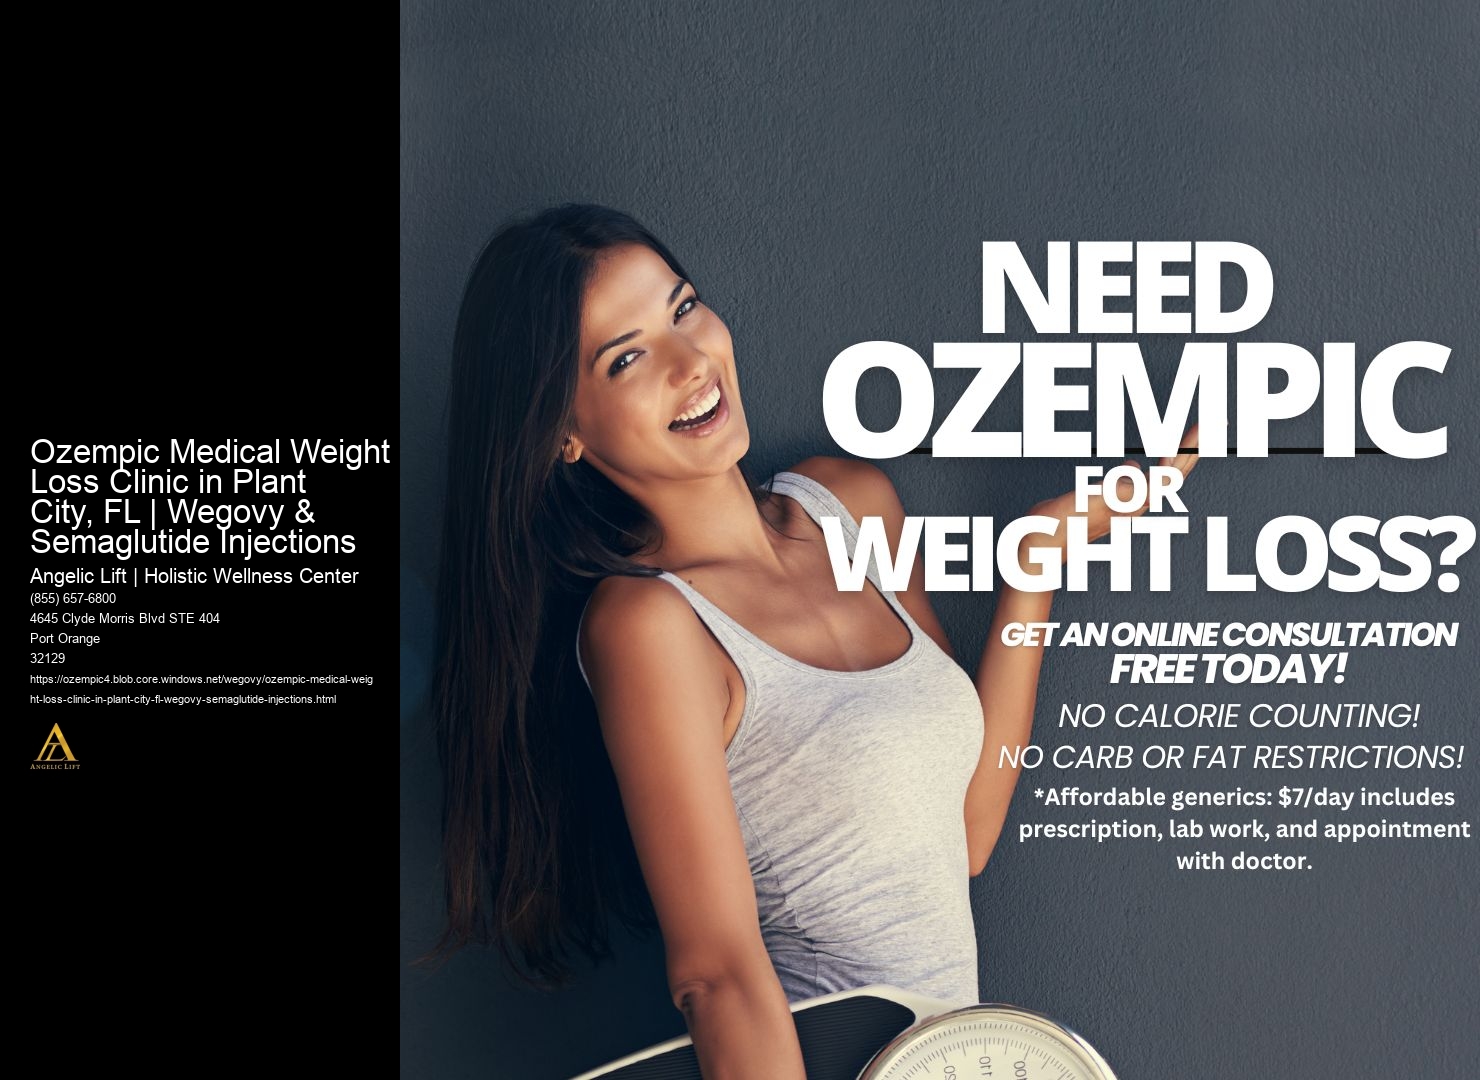 Ozempic Medical Weight Loss Clinic in Plant City, FL | Wegovy & Semaglutide Injections